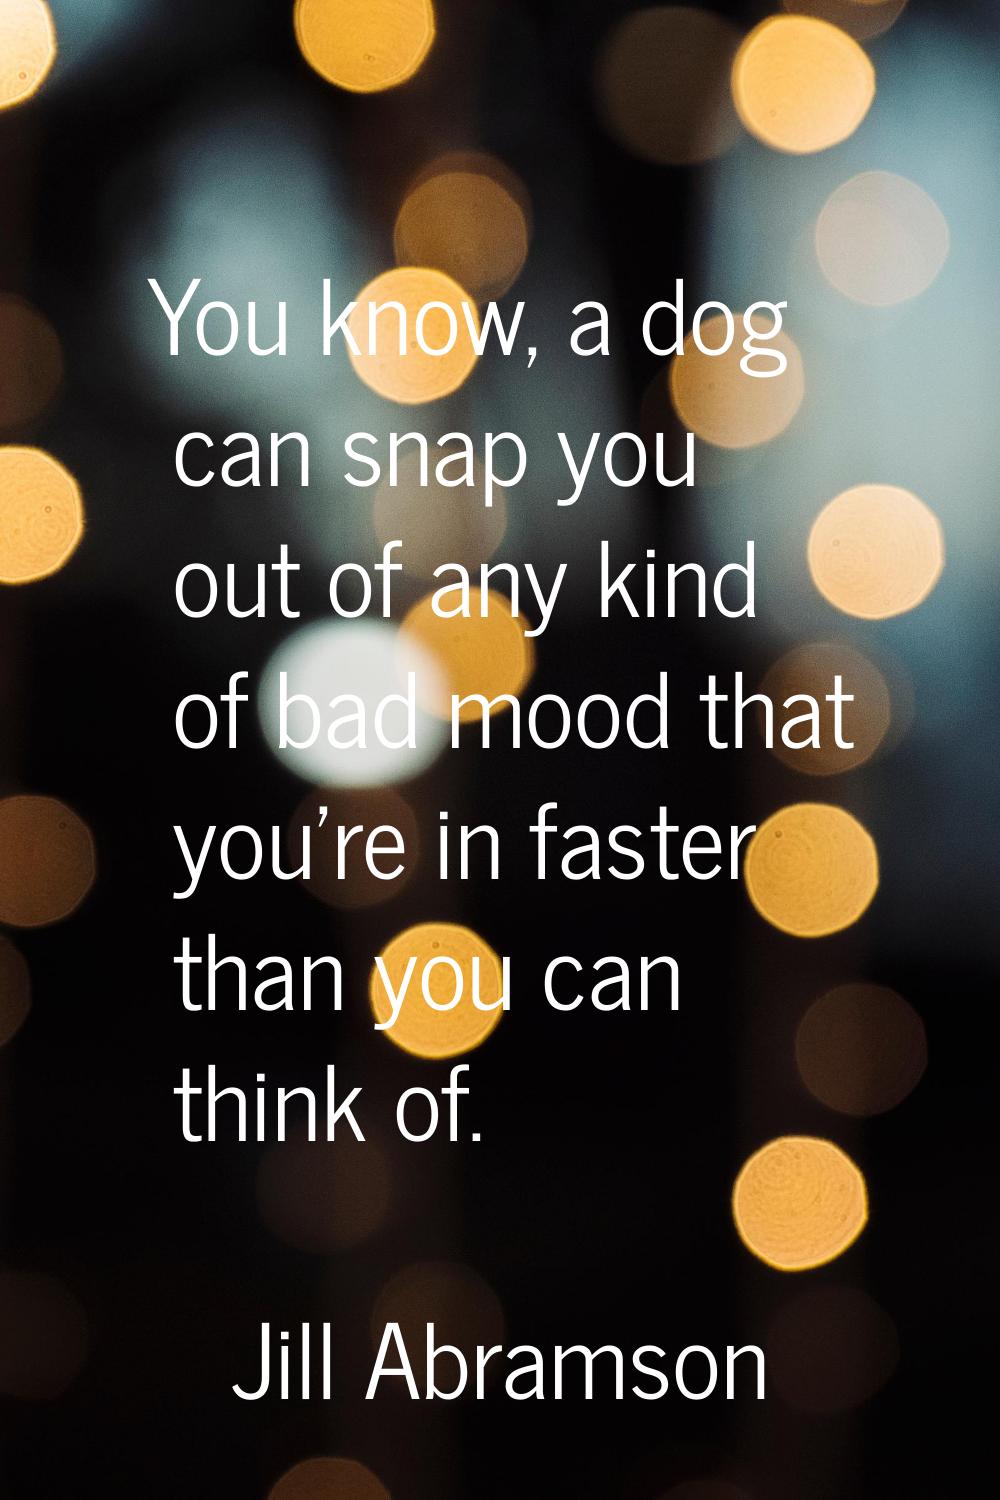 You know, a dog can snap you out of any kind of bad mood that you're in faster than you can think o